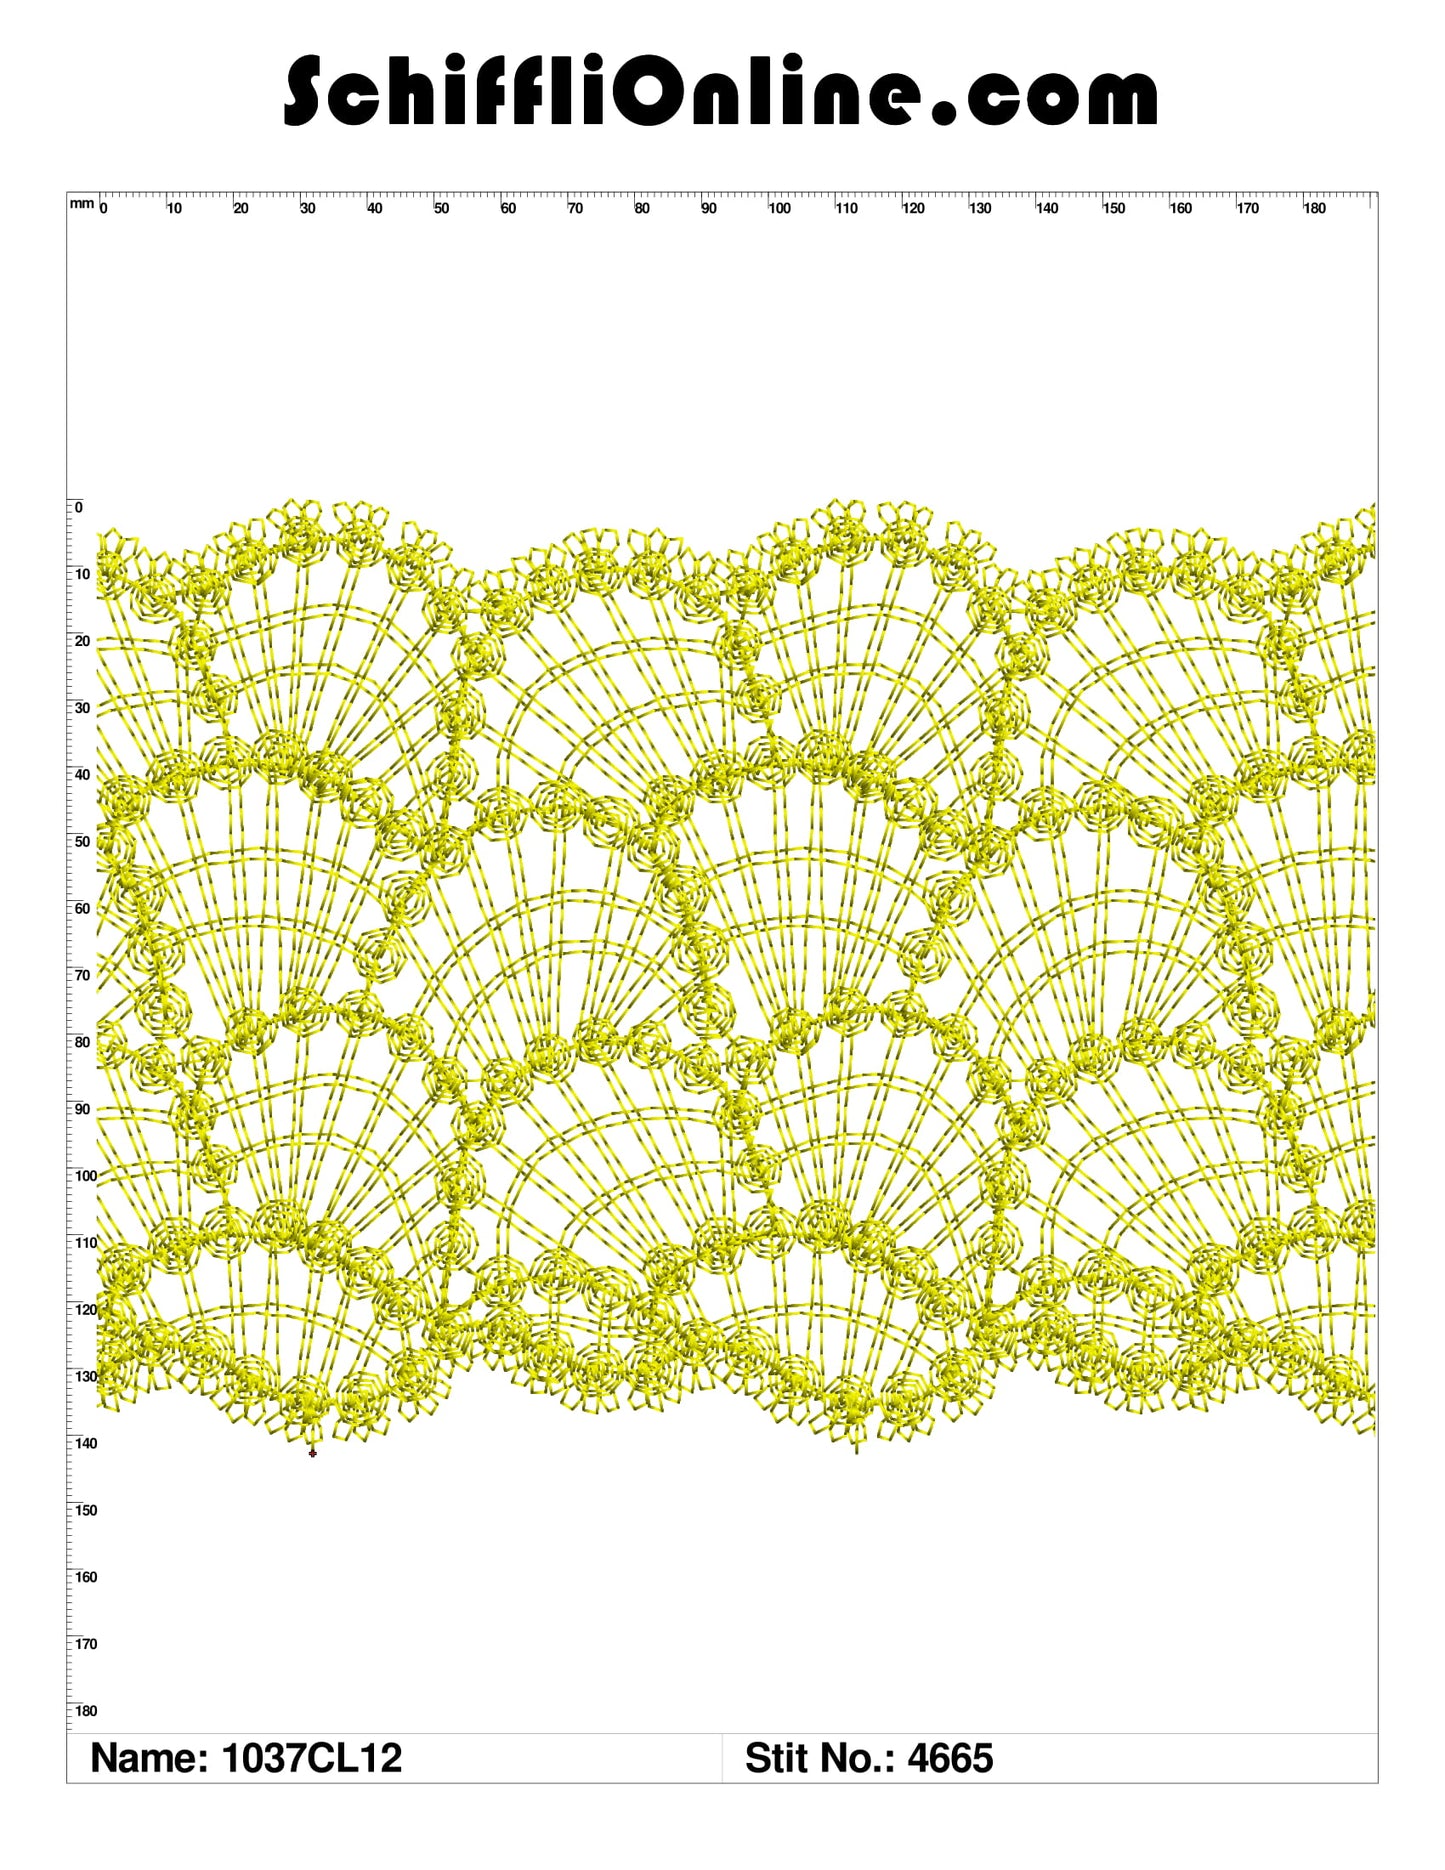 Book 146 CHEMICAL LACE 12X4 50 DESIGNS